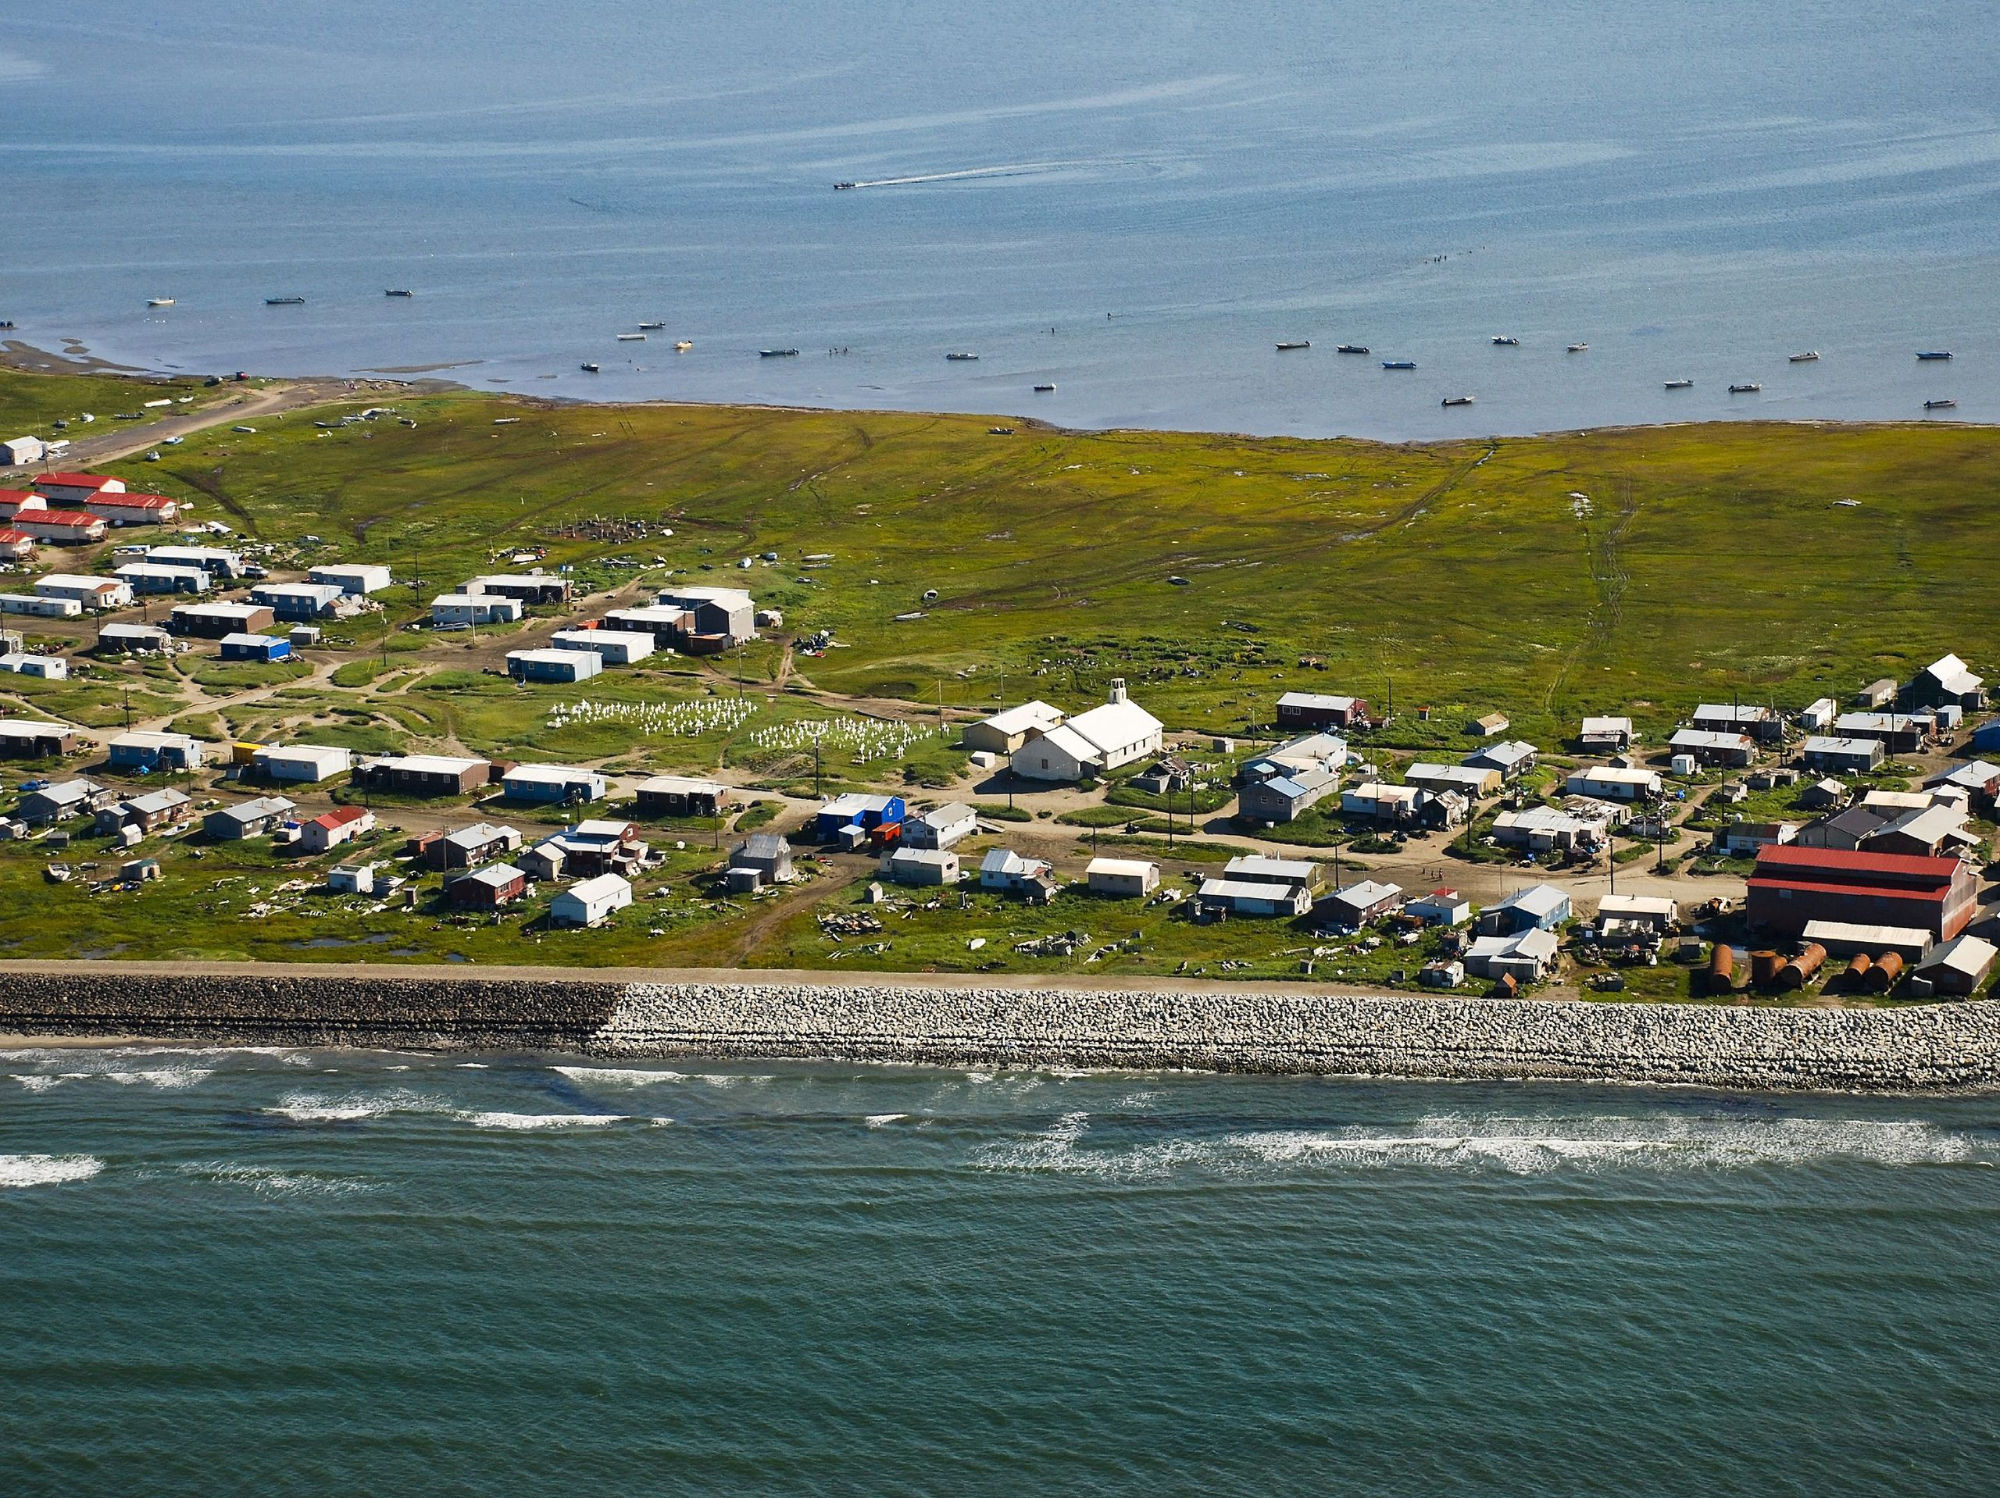 Aerial photo of the village of Shishmaref, Alaska in 2014, built on a barrier island.